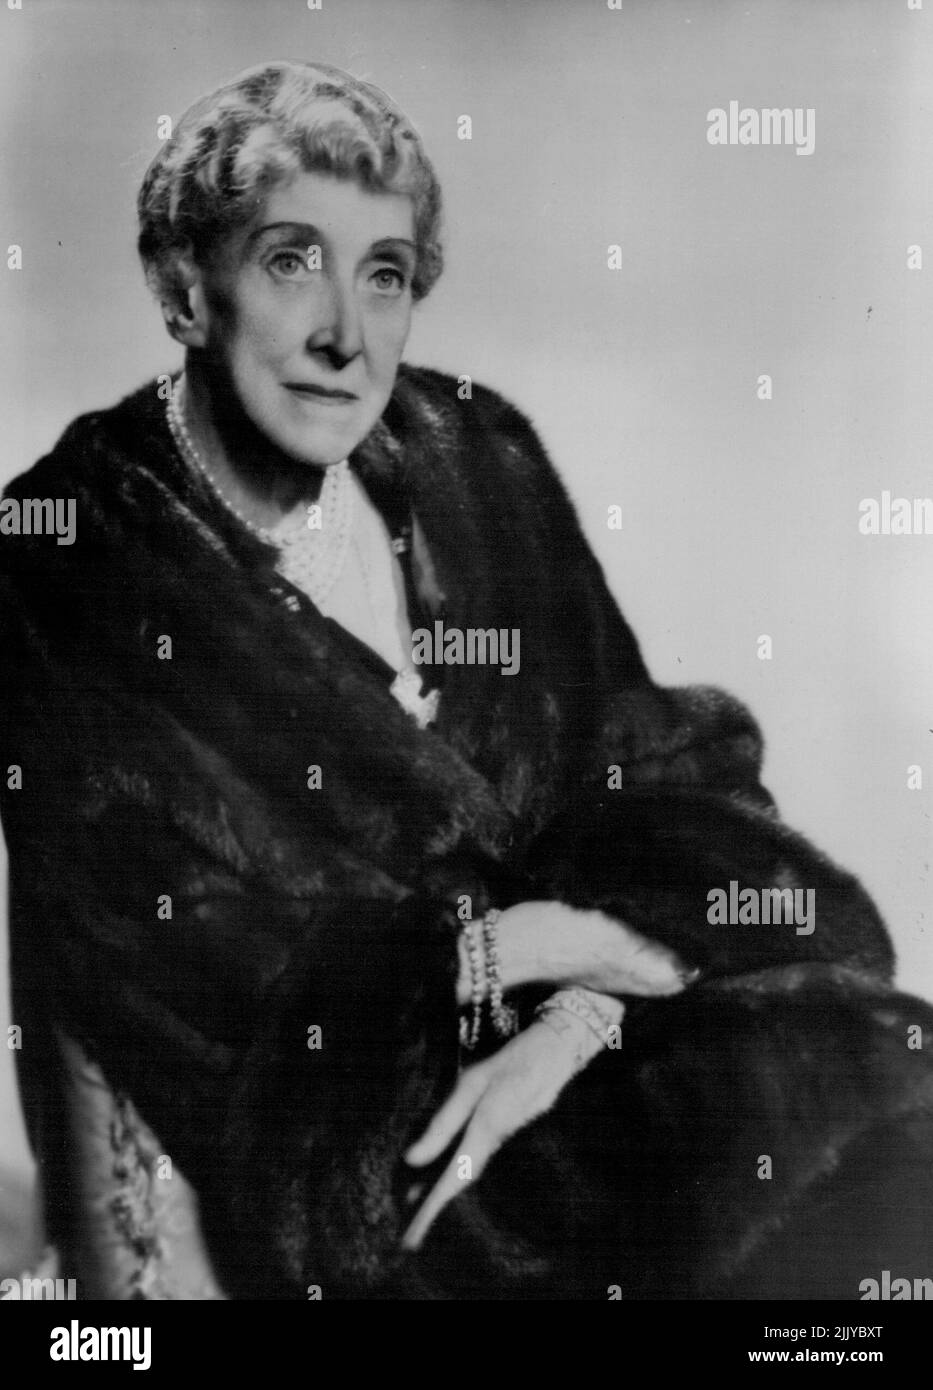 H.H. Princess Marie Louise, V.A..C.I., G.C.V.O., G.B.E. -- Grand-daughter of the late Queen Victoria. Born on August 12th, 1872, daughter of H.R.H. Princess Helena Augusta Victoria and General H.R.H. Prince Christian of Schleswig-Holstein. Her mother was the 5th child of Queen Victoria and Prince Albert. October 19, 1955. (Photo by Vivienne, Camera Press). Stock Photo